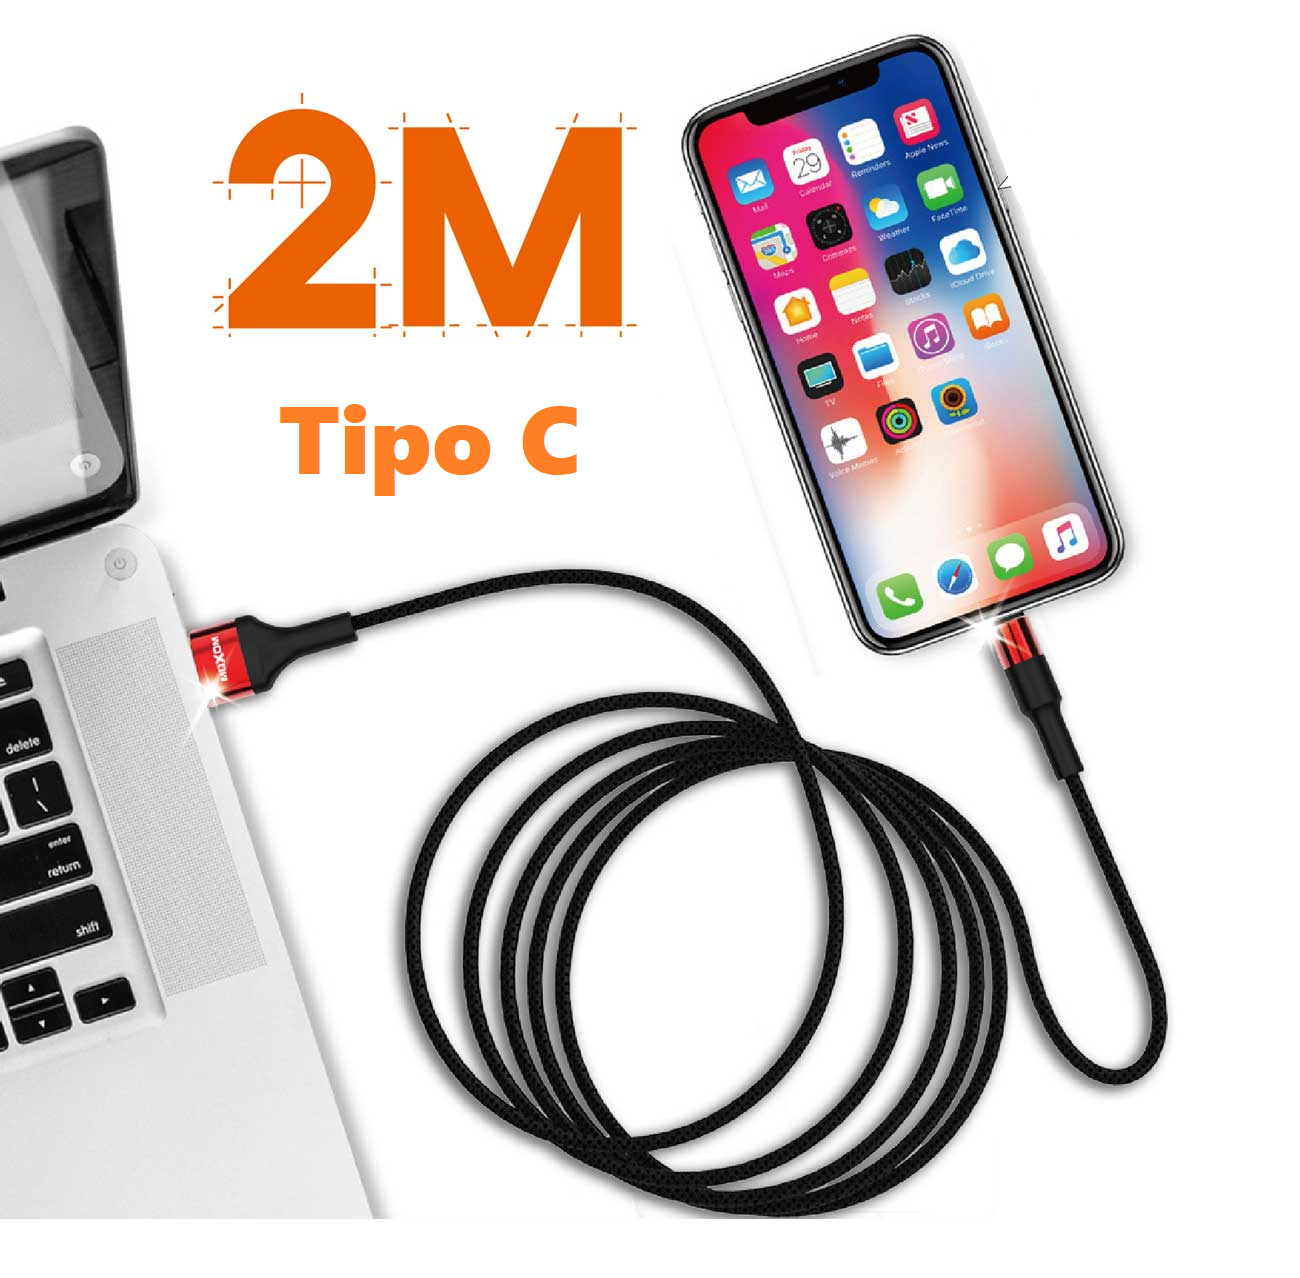 Cable Tipo C 2 Metros Moxom CC-54